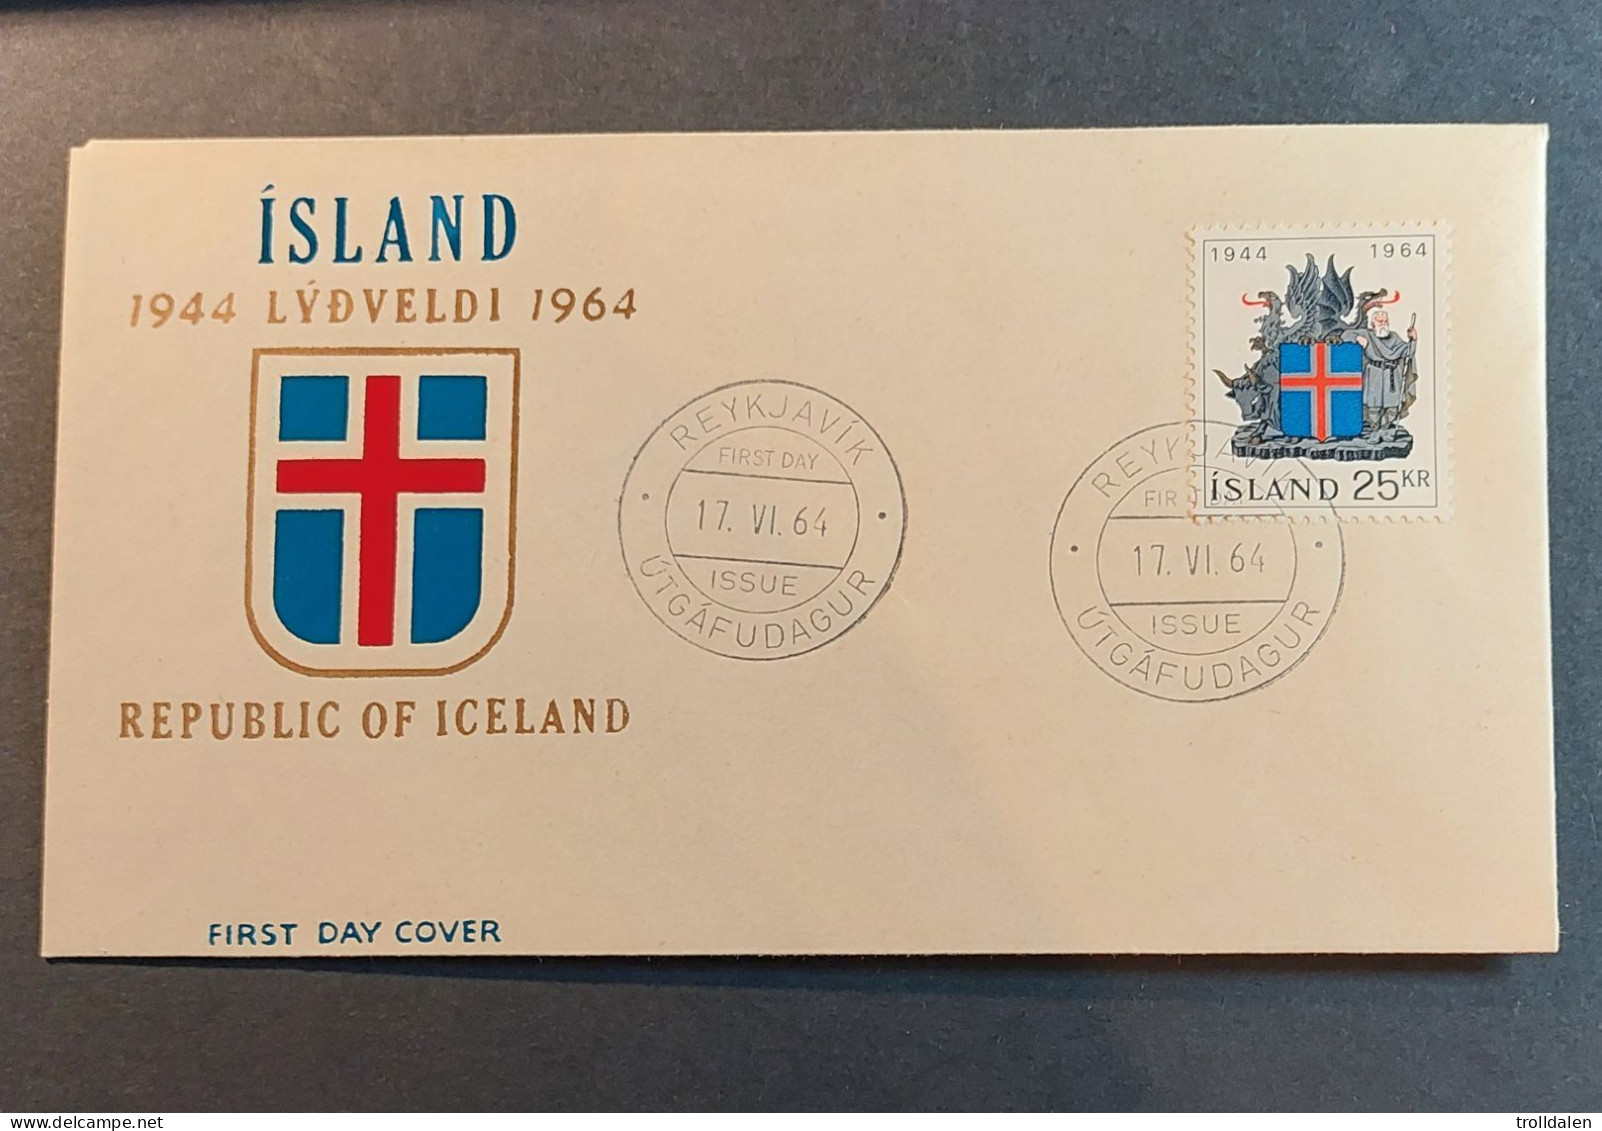 Iceland FDC 1964 - FDC